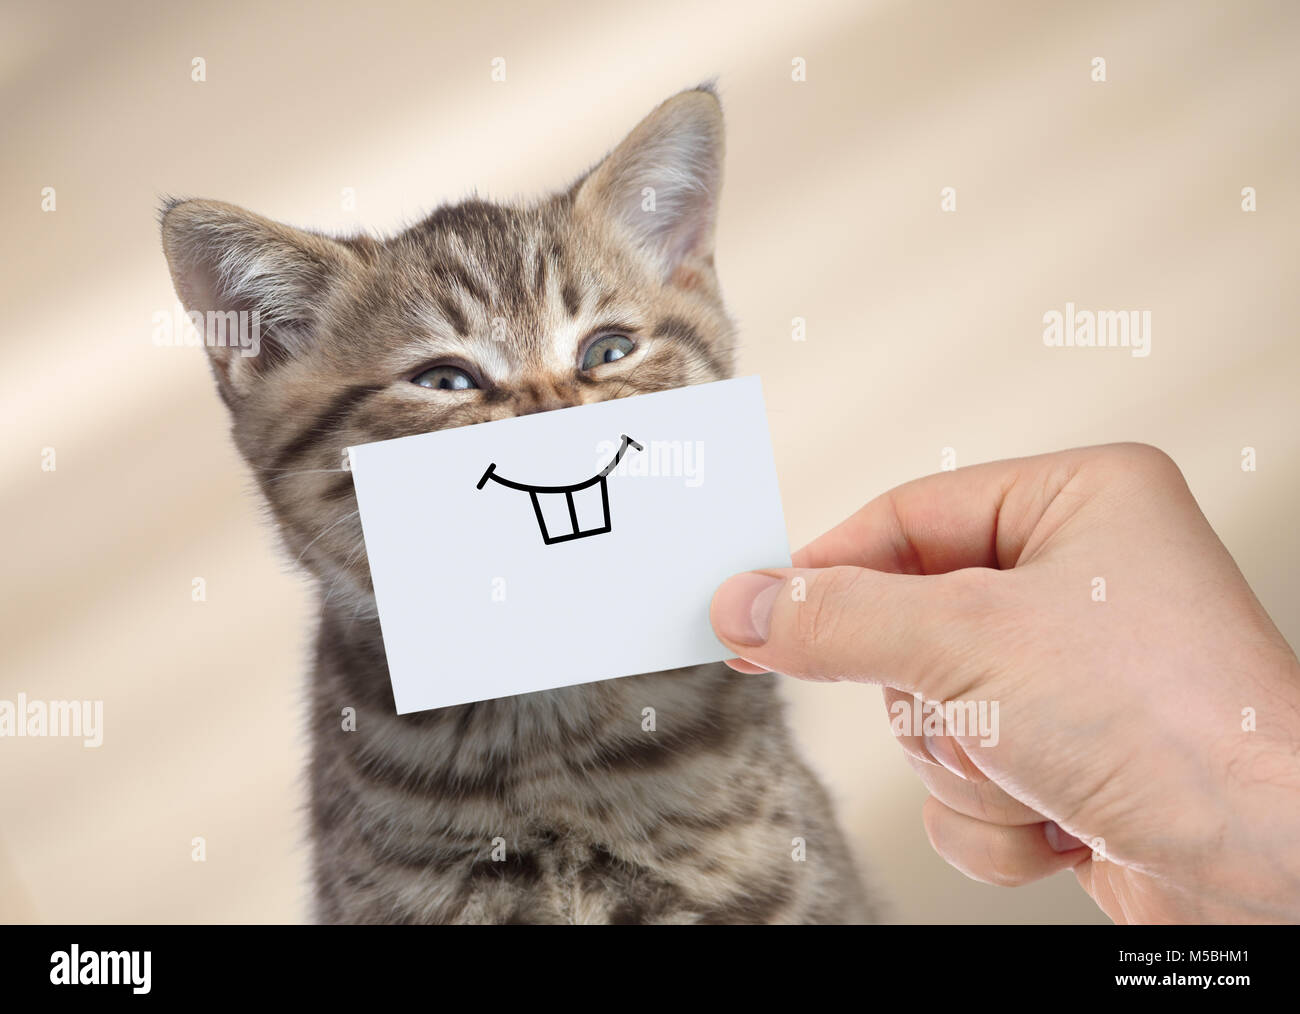 funny cat with smile on cardboard Stock Photo